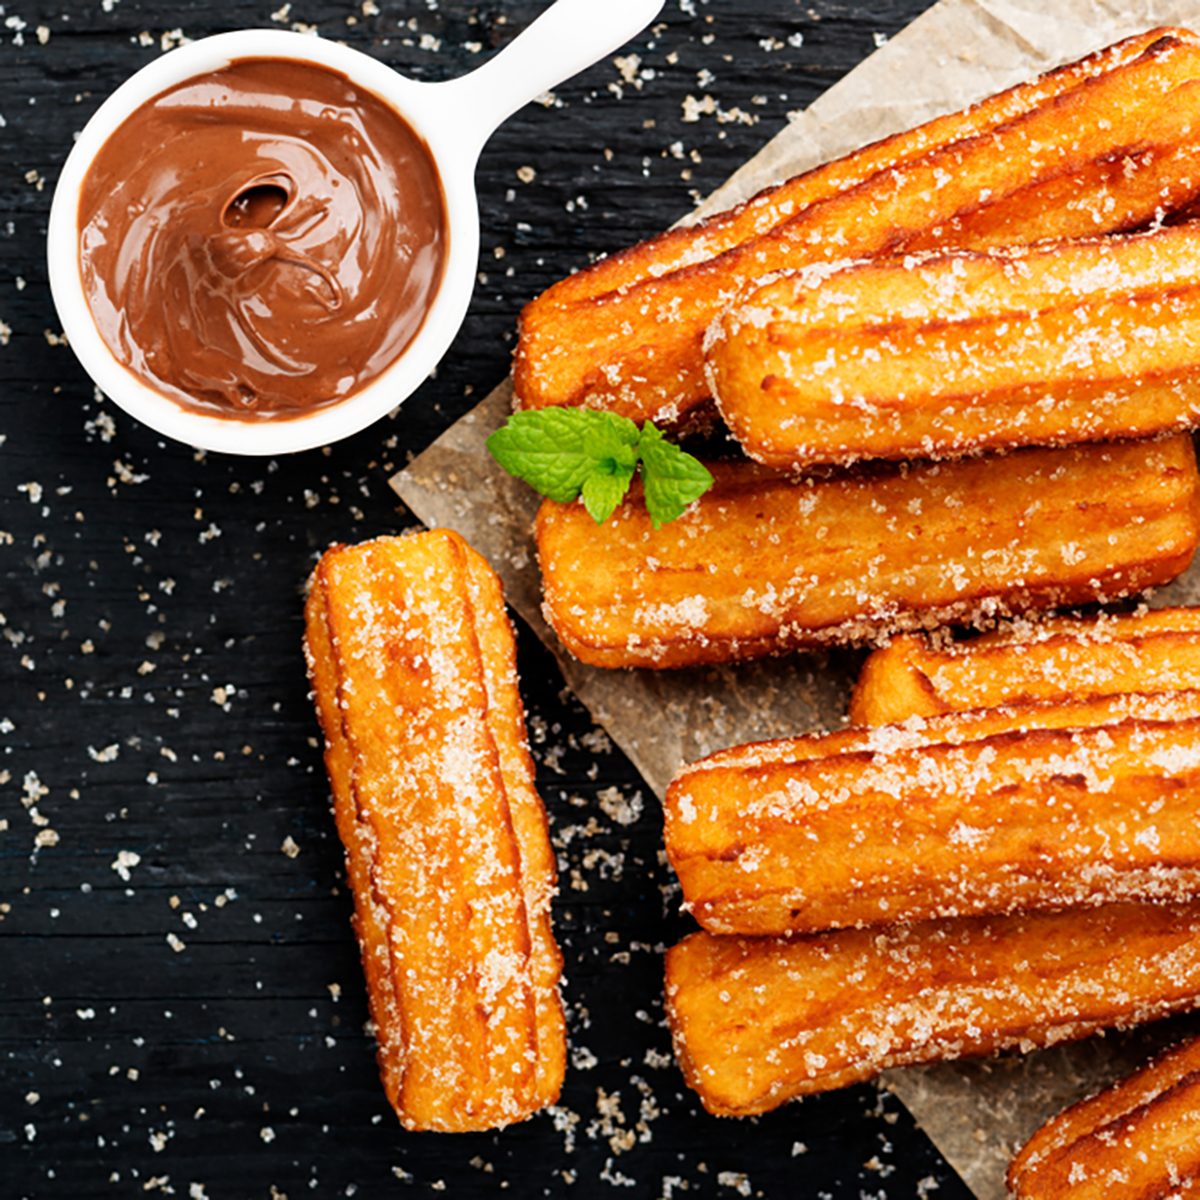 Churros with sugar and chocolate sauce on black background.